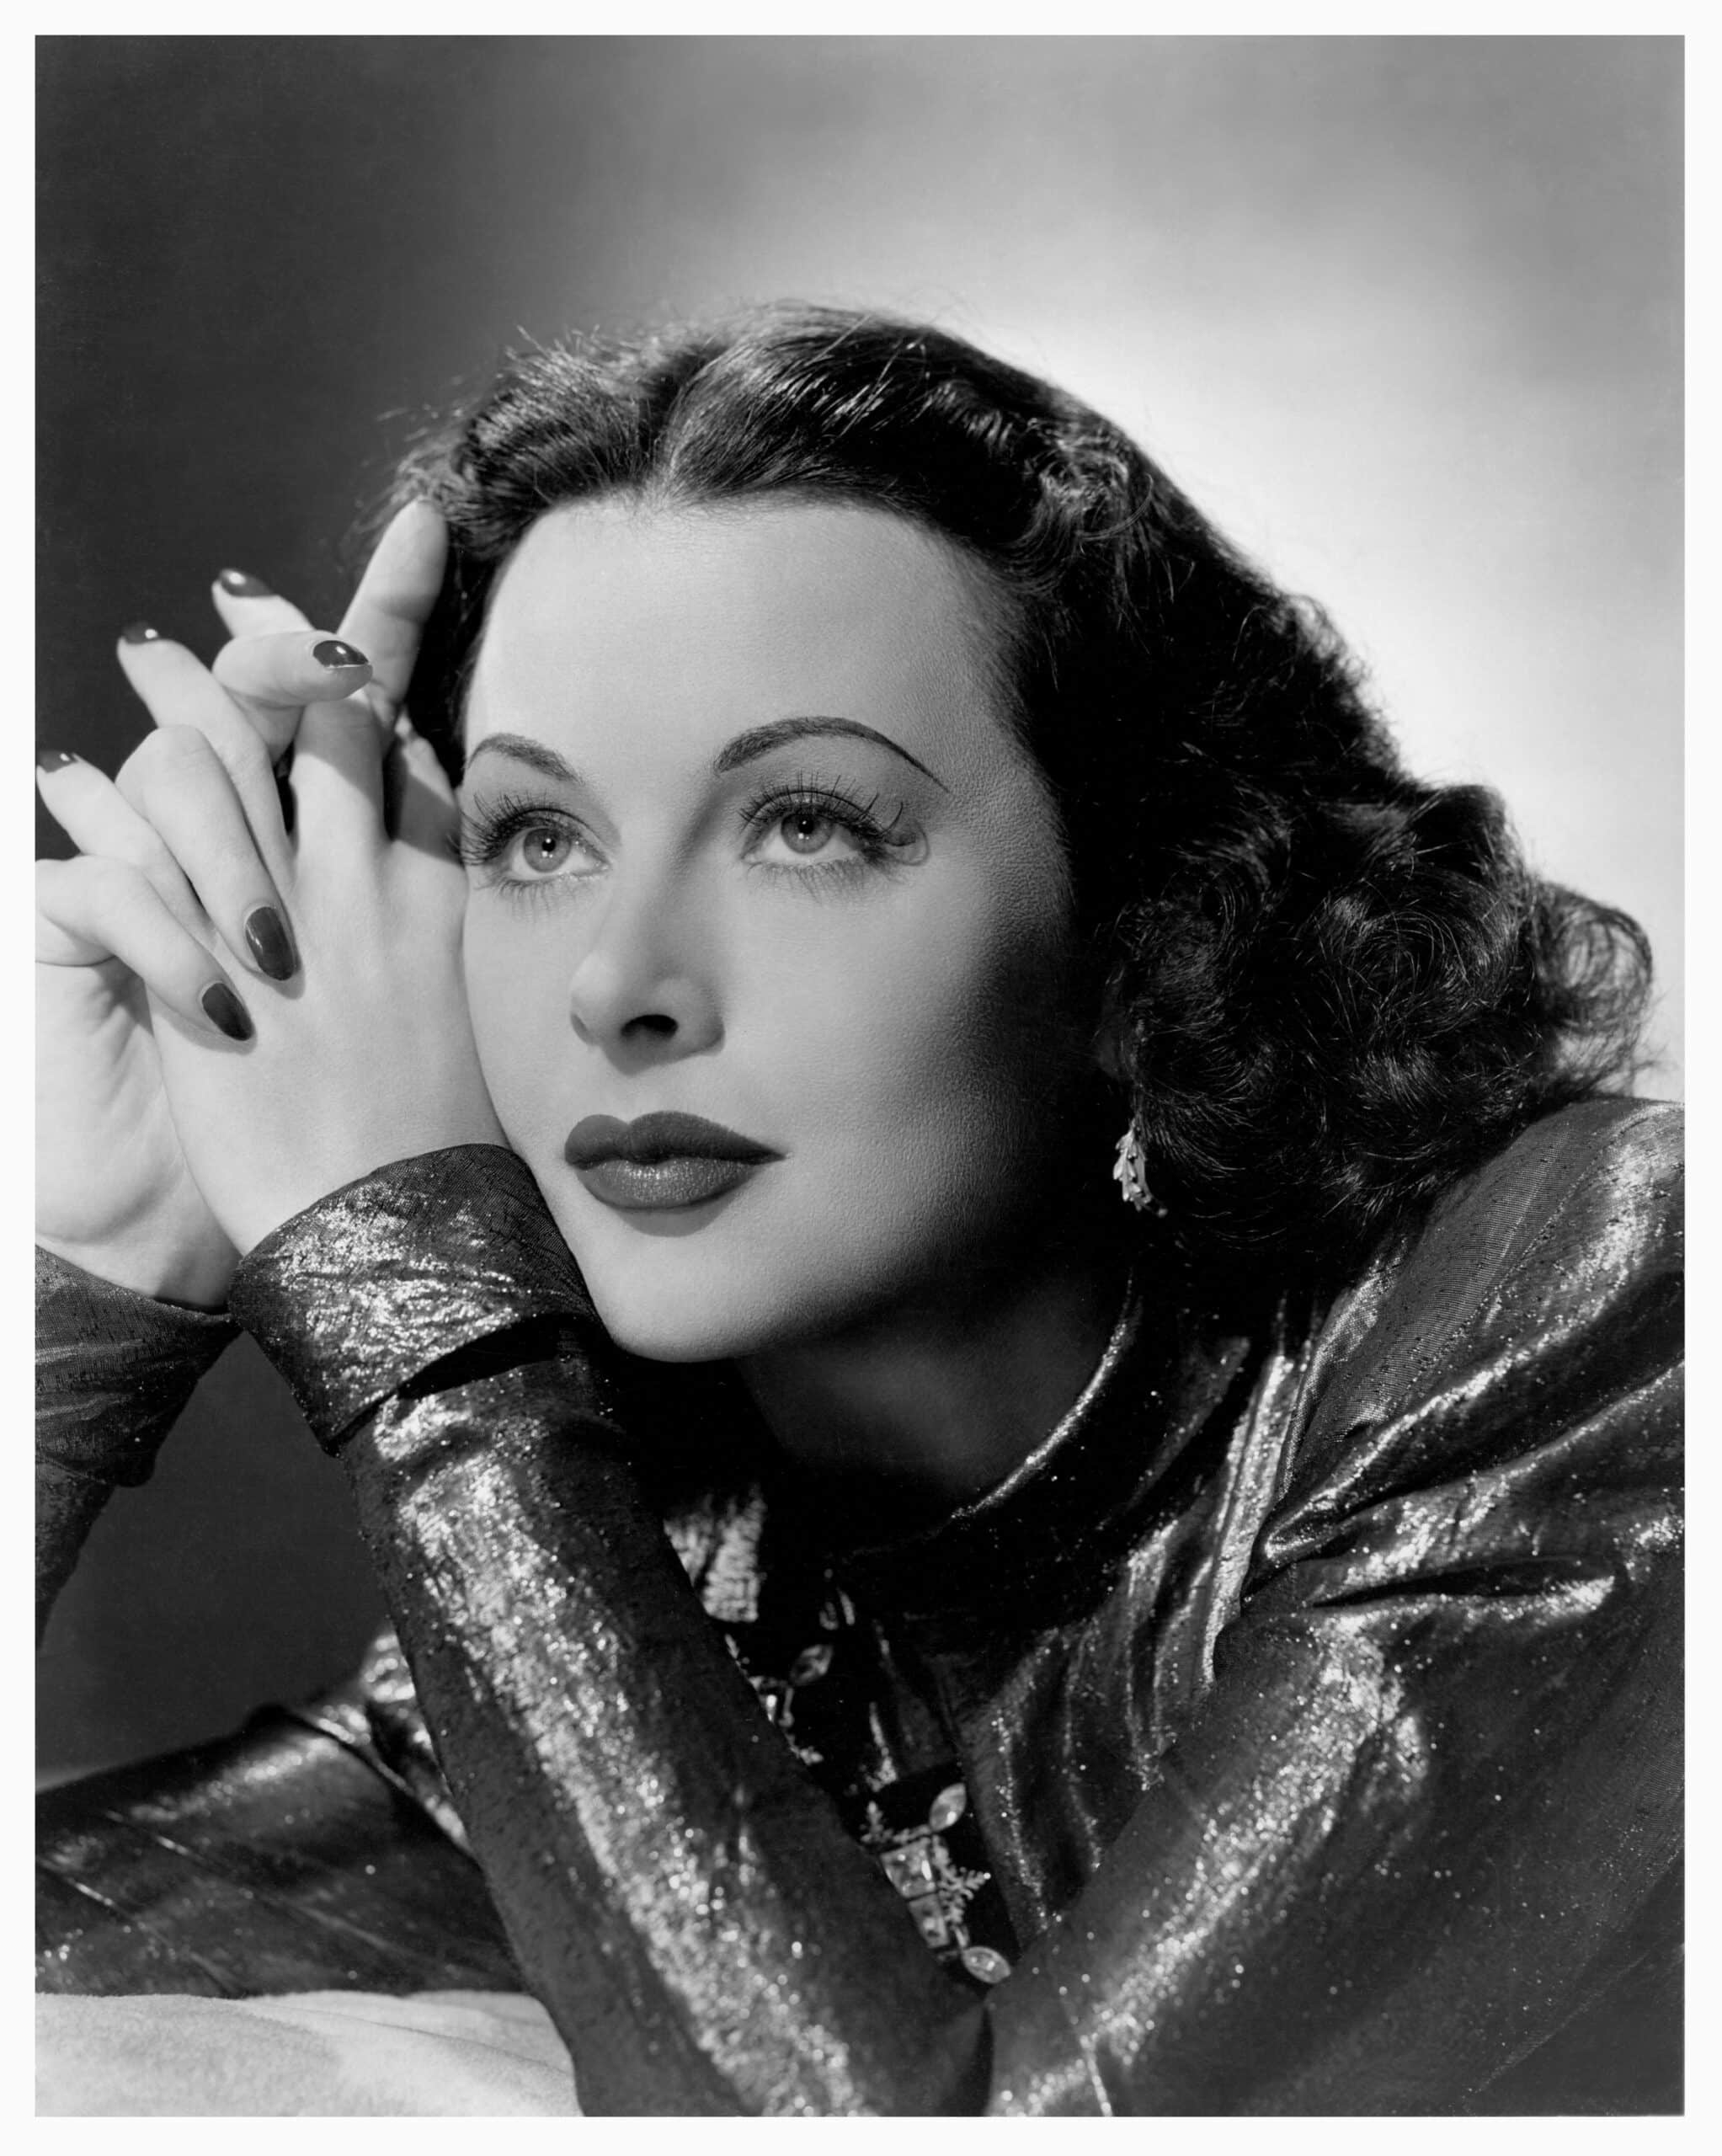 How Hedy Lamarr and Her Inventions Changed the World